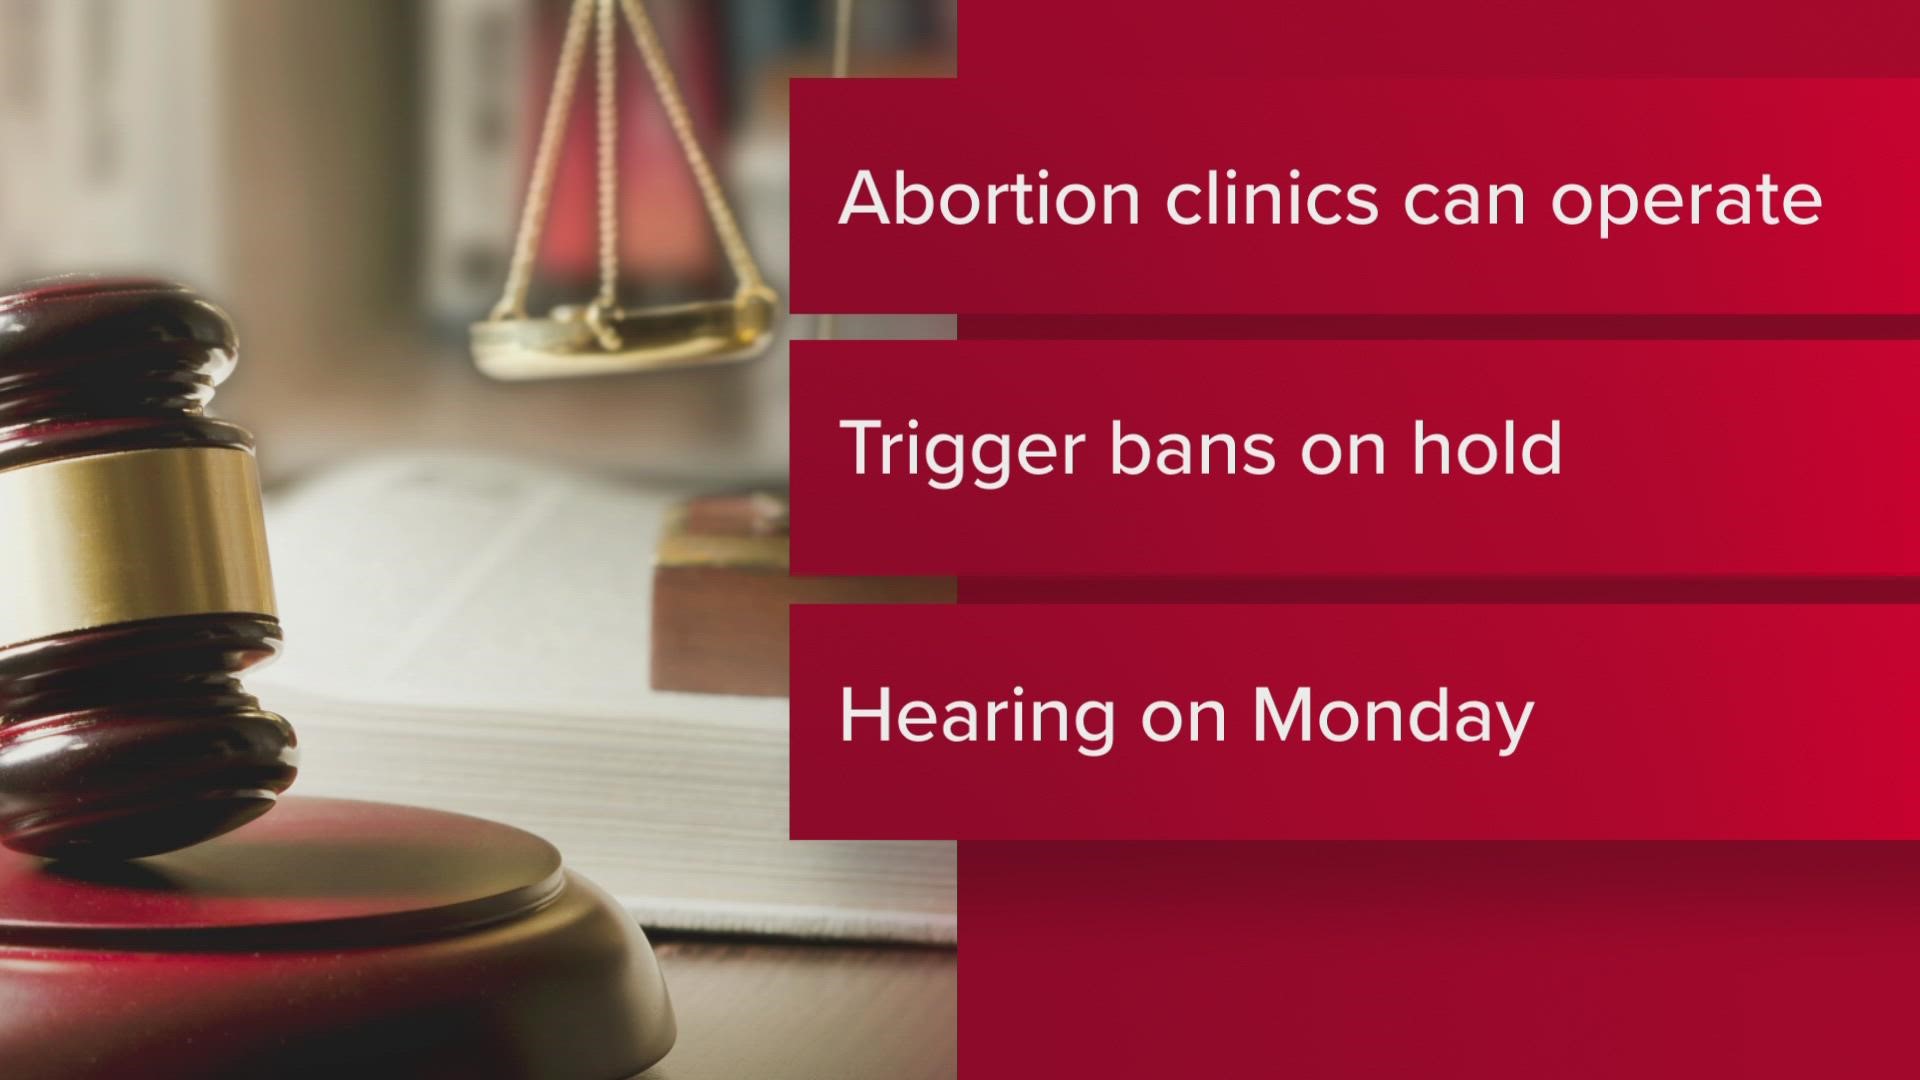 Louisiana's abortion ban is now blocked once again as the lawsuit plays out in Baton Rouge.